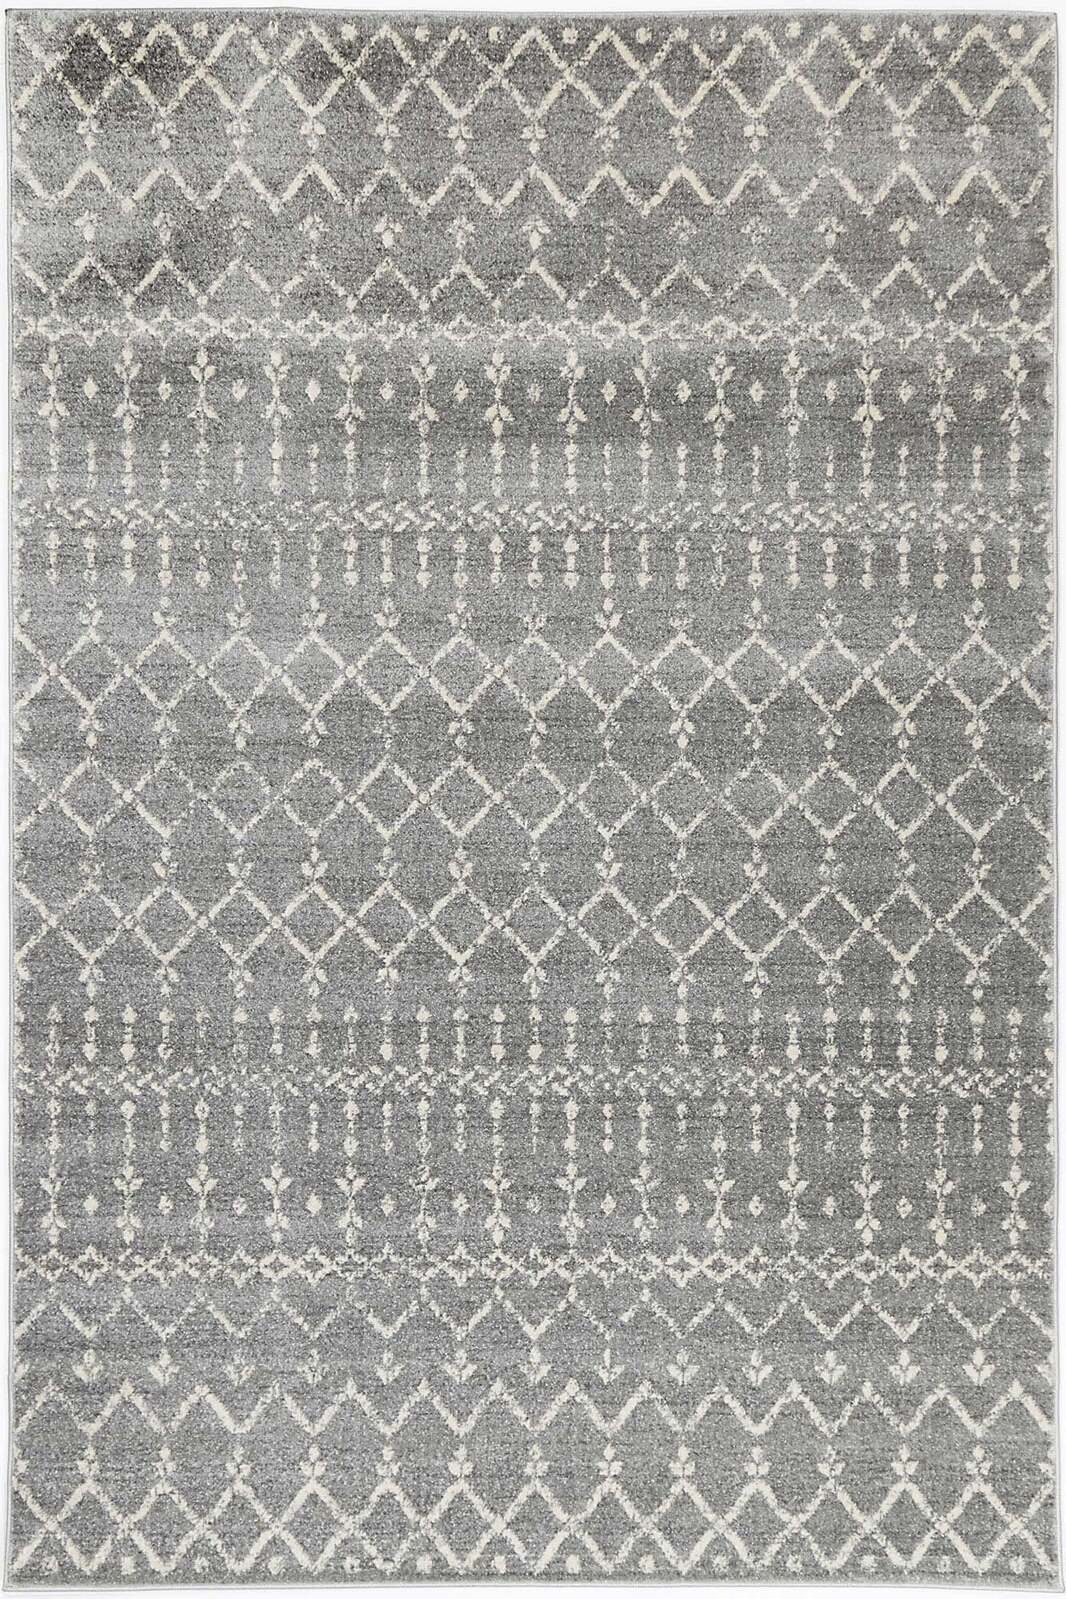 delicate-cassiday-grey-ivory-rug 160x230